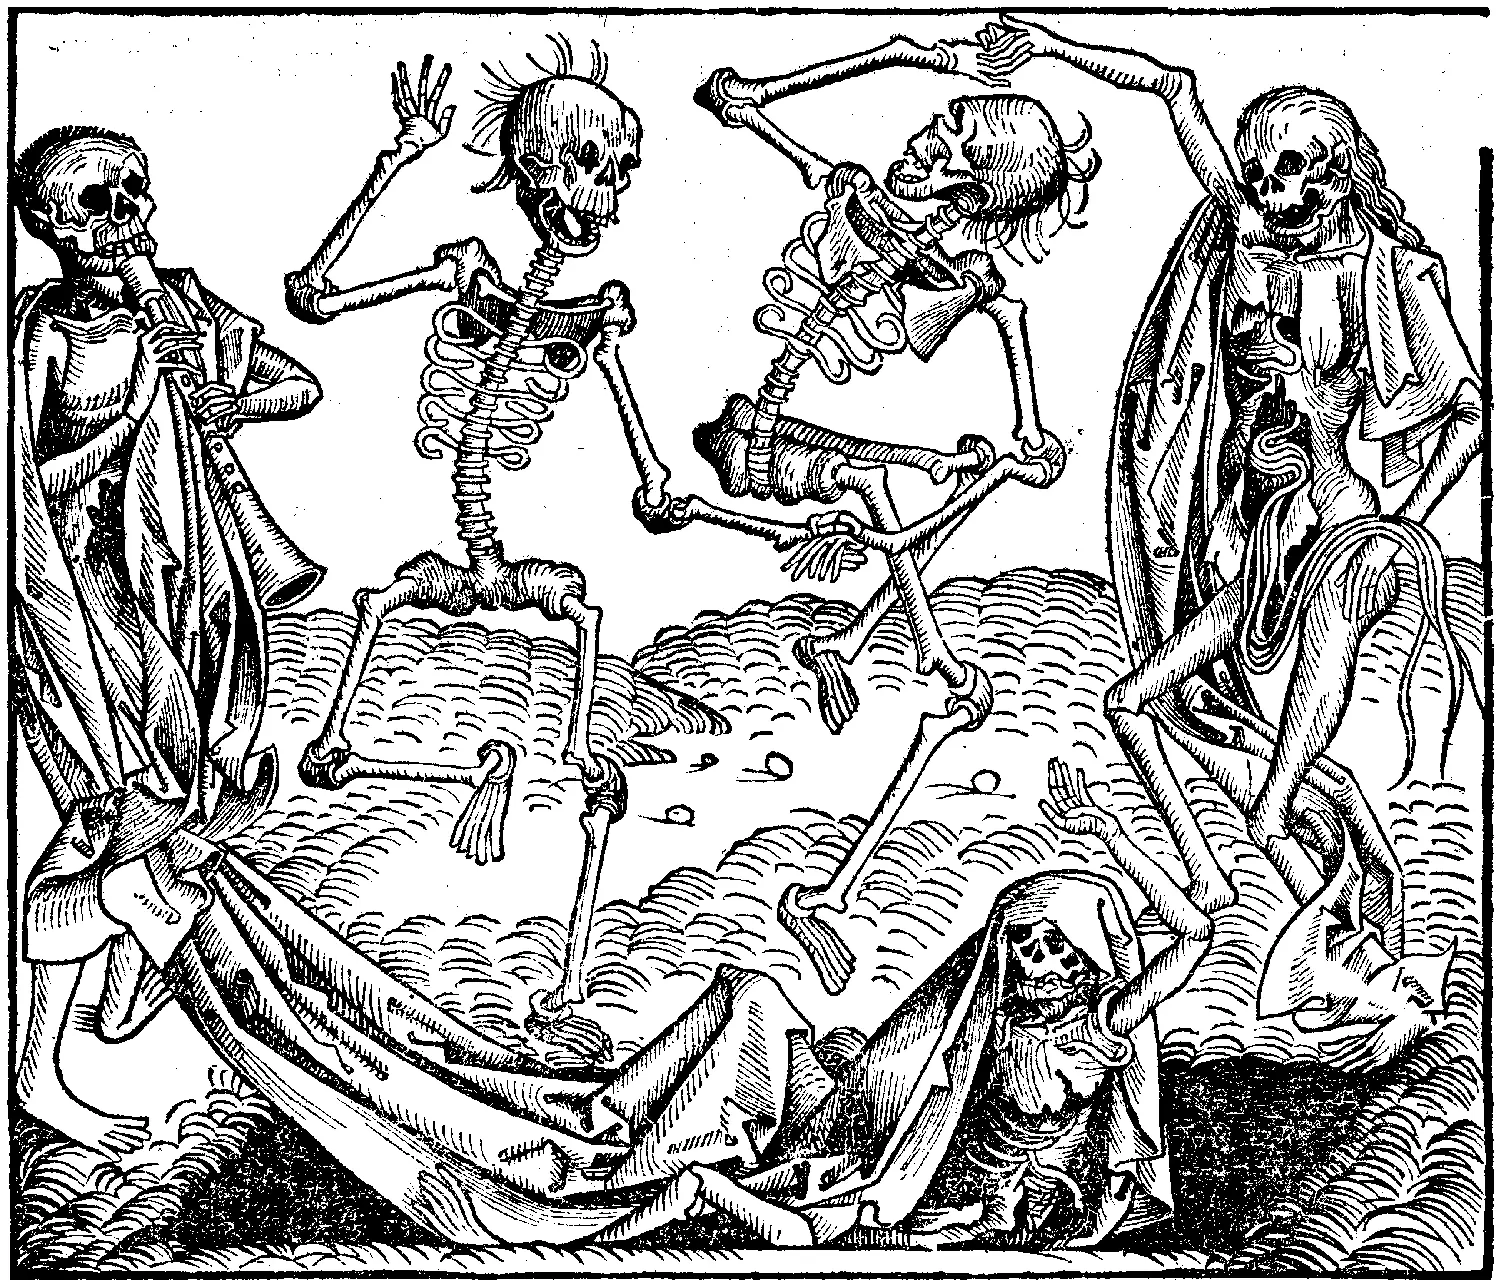 Woodcut print of skeletons playing music and dancing as a skeleton crawls out of the grave.